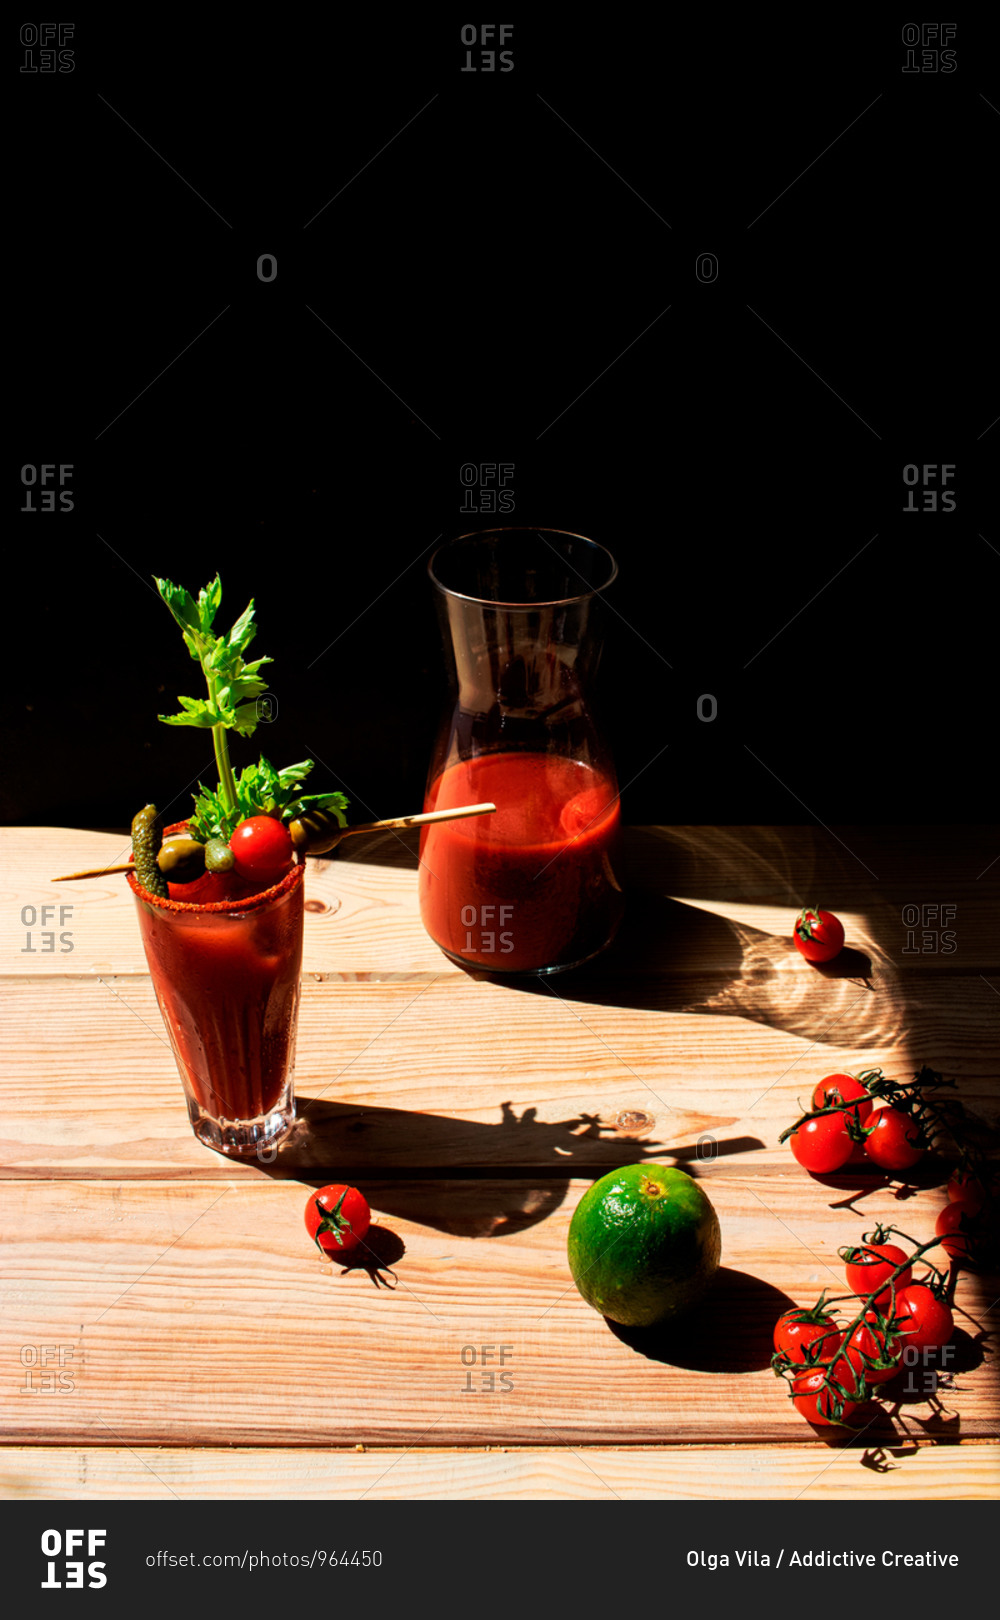 Virgin blood mary placed on a wooden table with black background